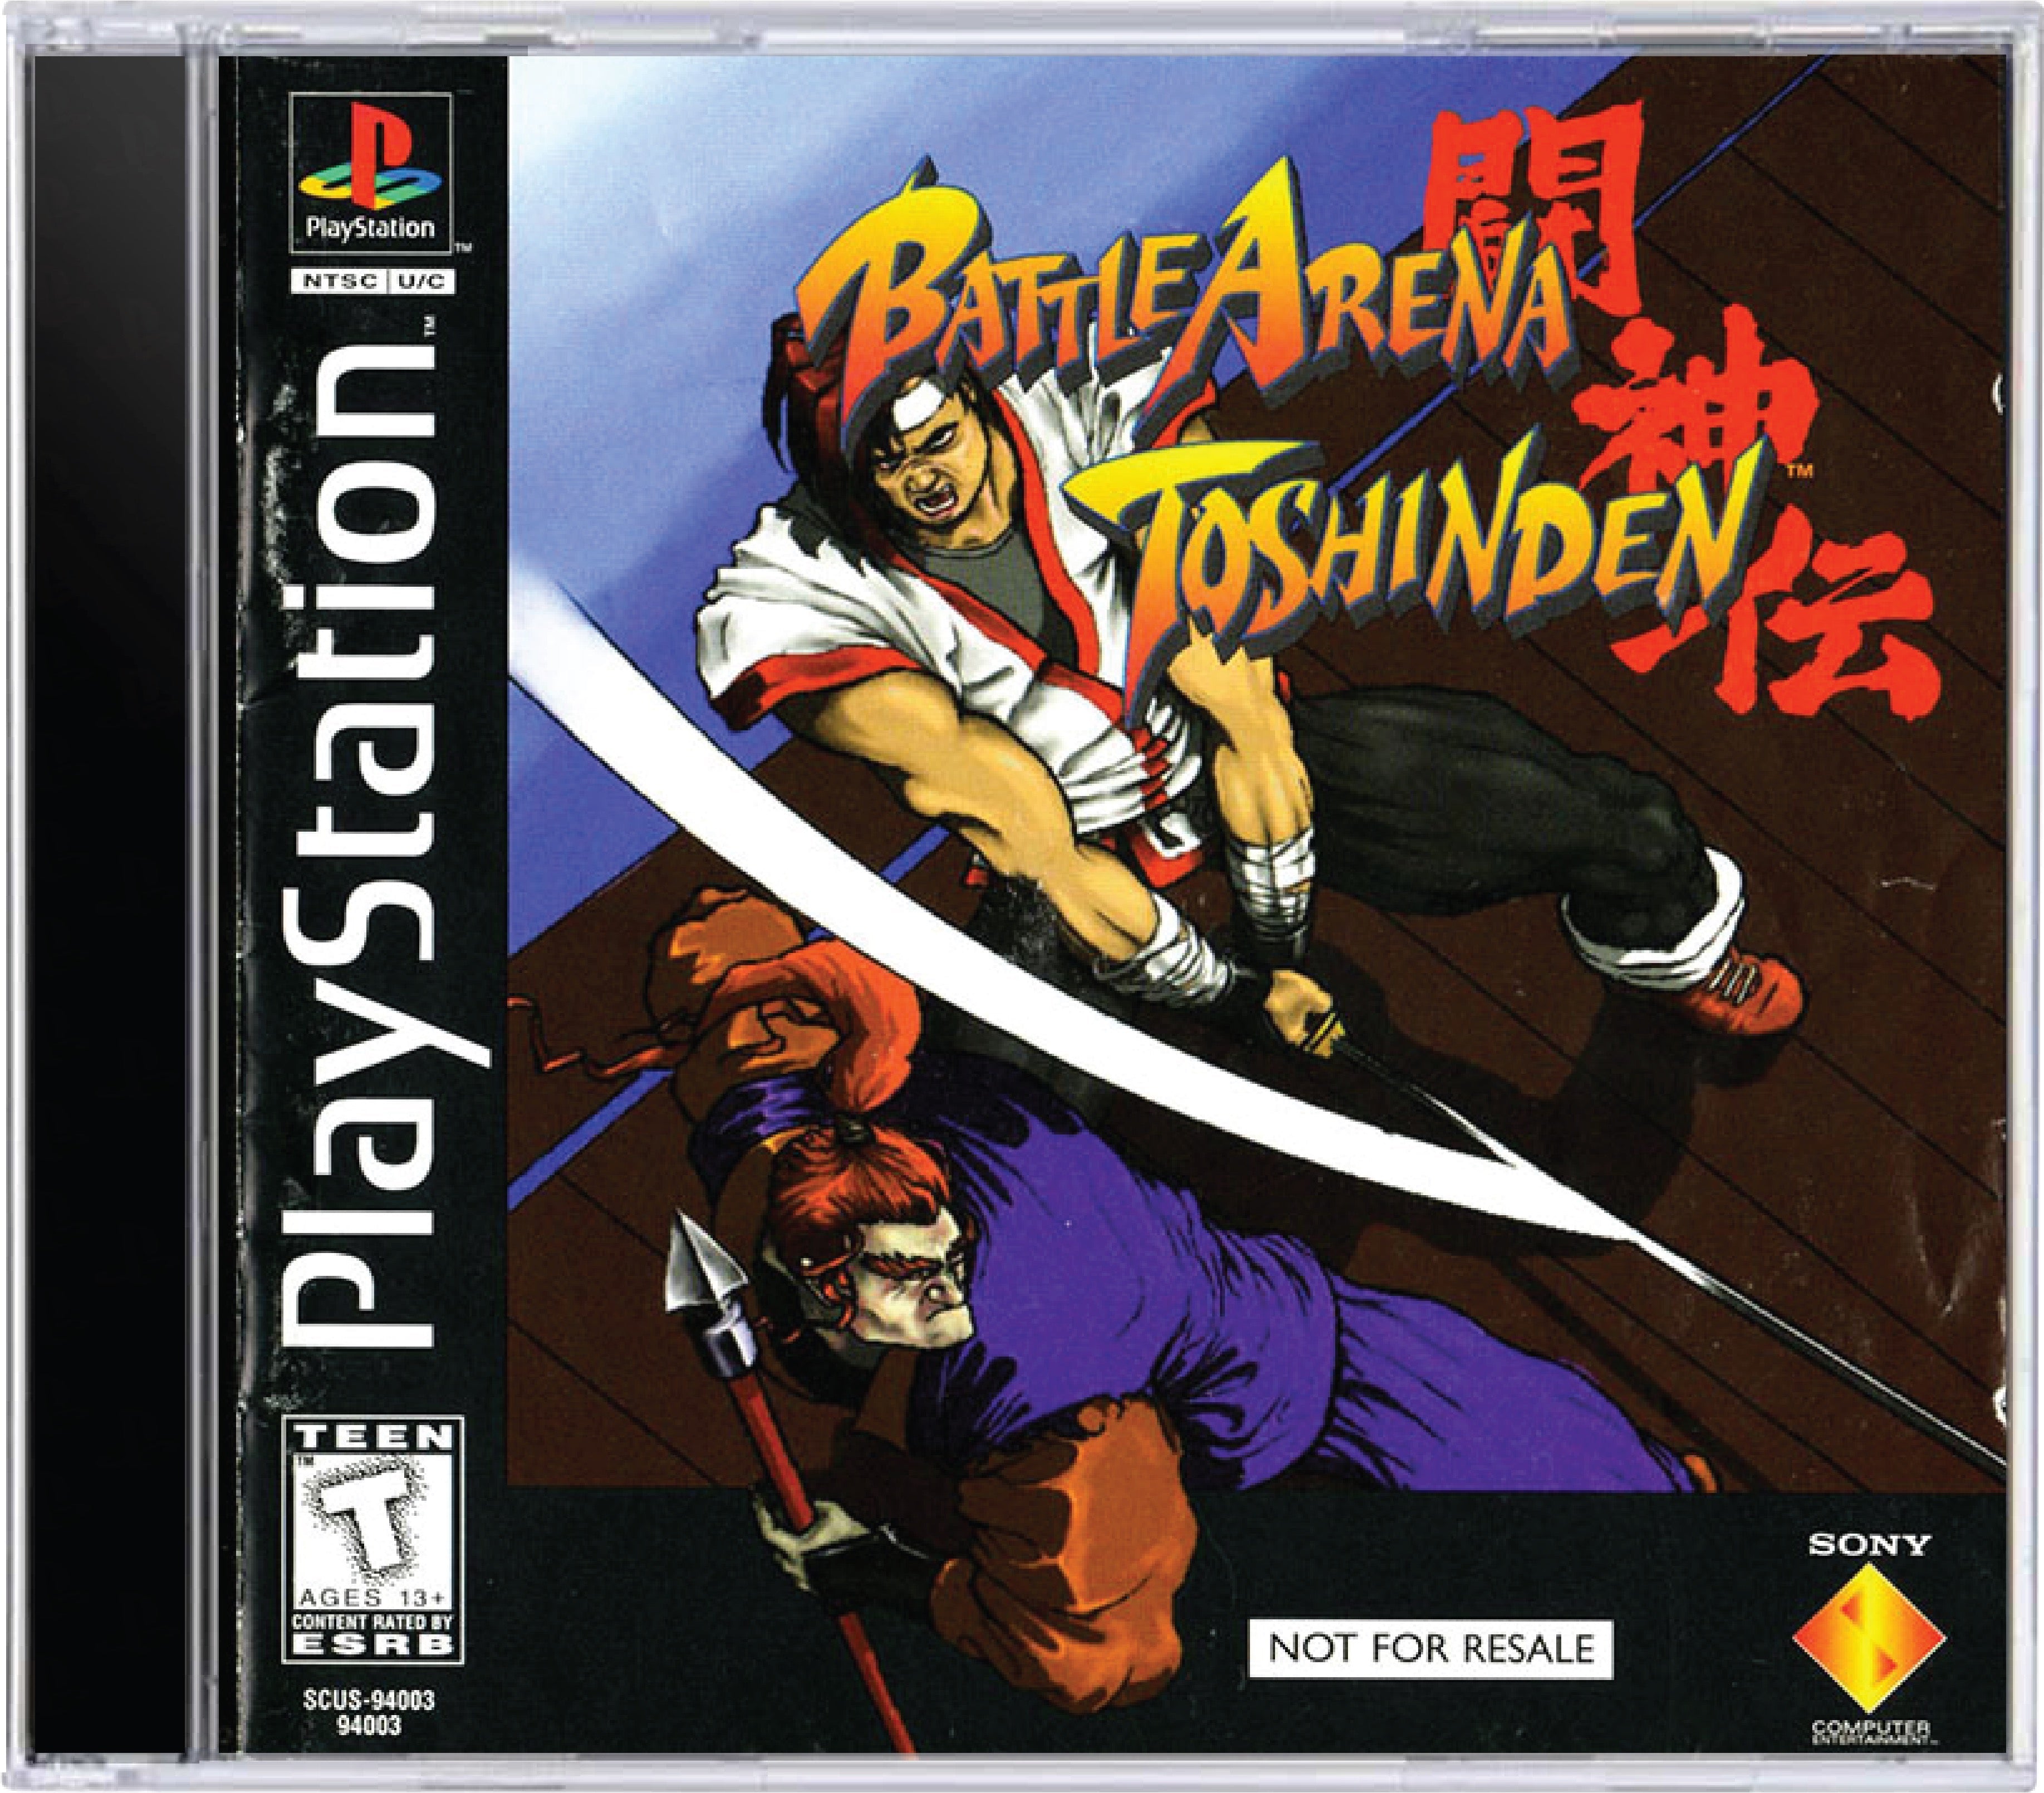 Battle Arena Toshinden Cover Art and Product Photo